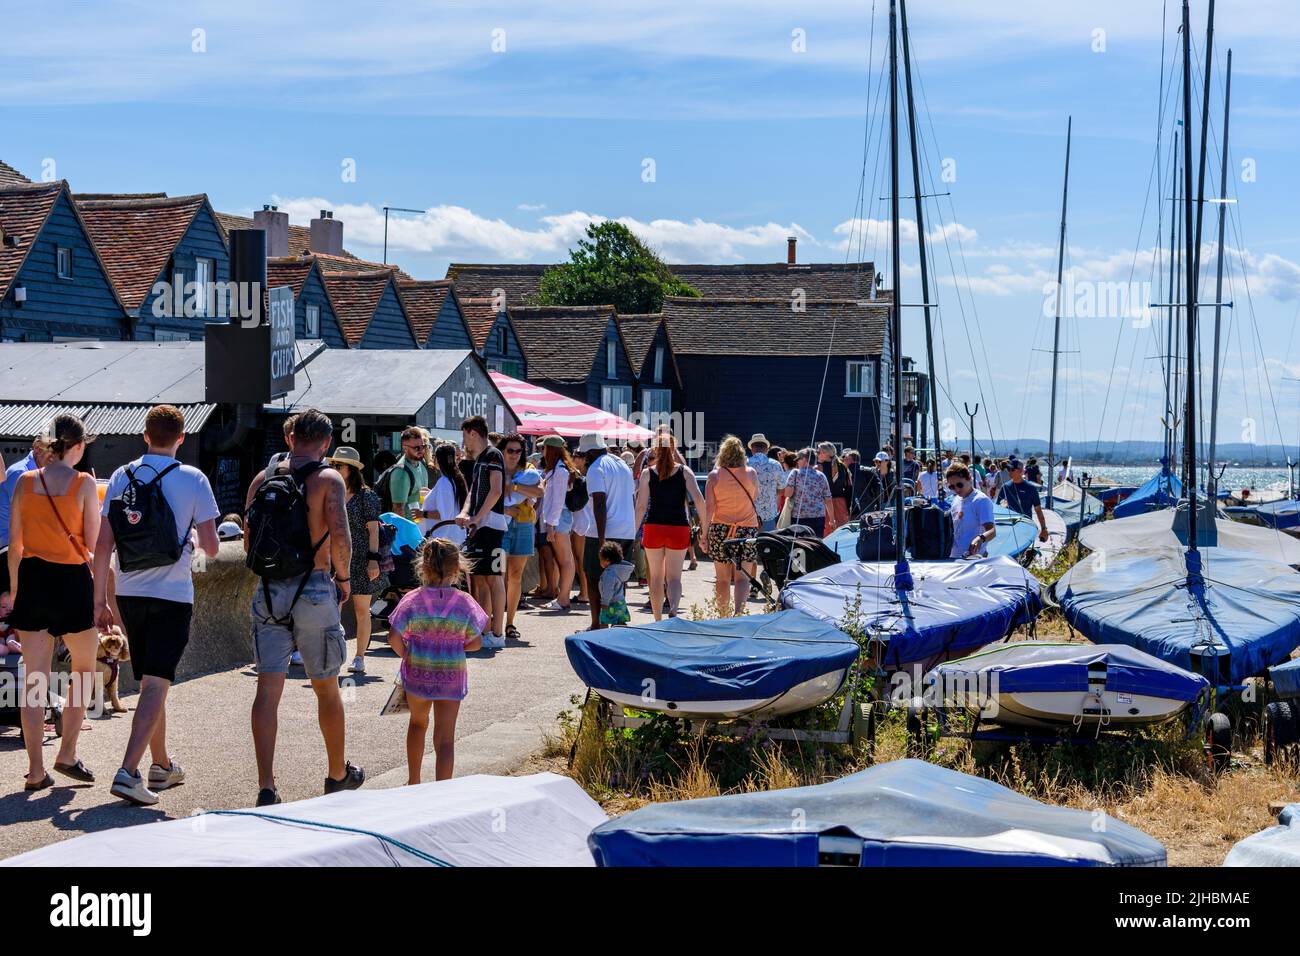 Whitstable, Kent, UK: People enjoy the summer sunshine in Whitstable at the start of a record-breaking heatwave in the UK. Stock Photo